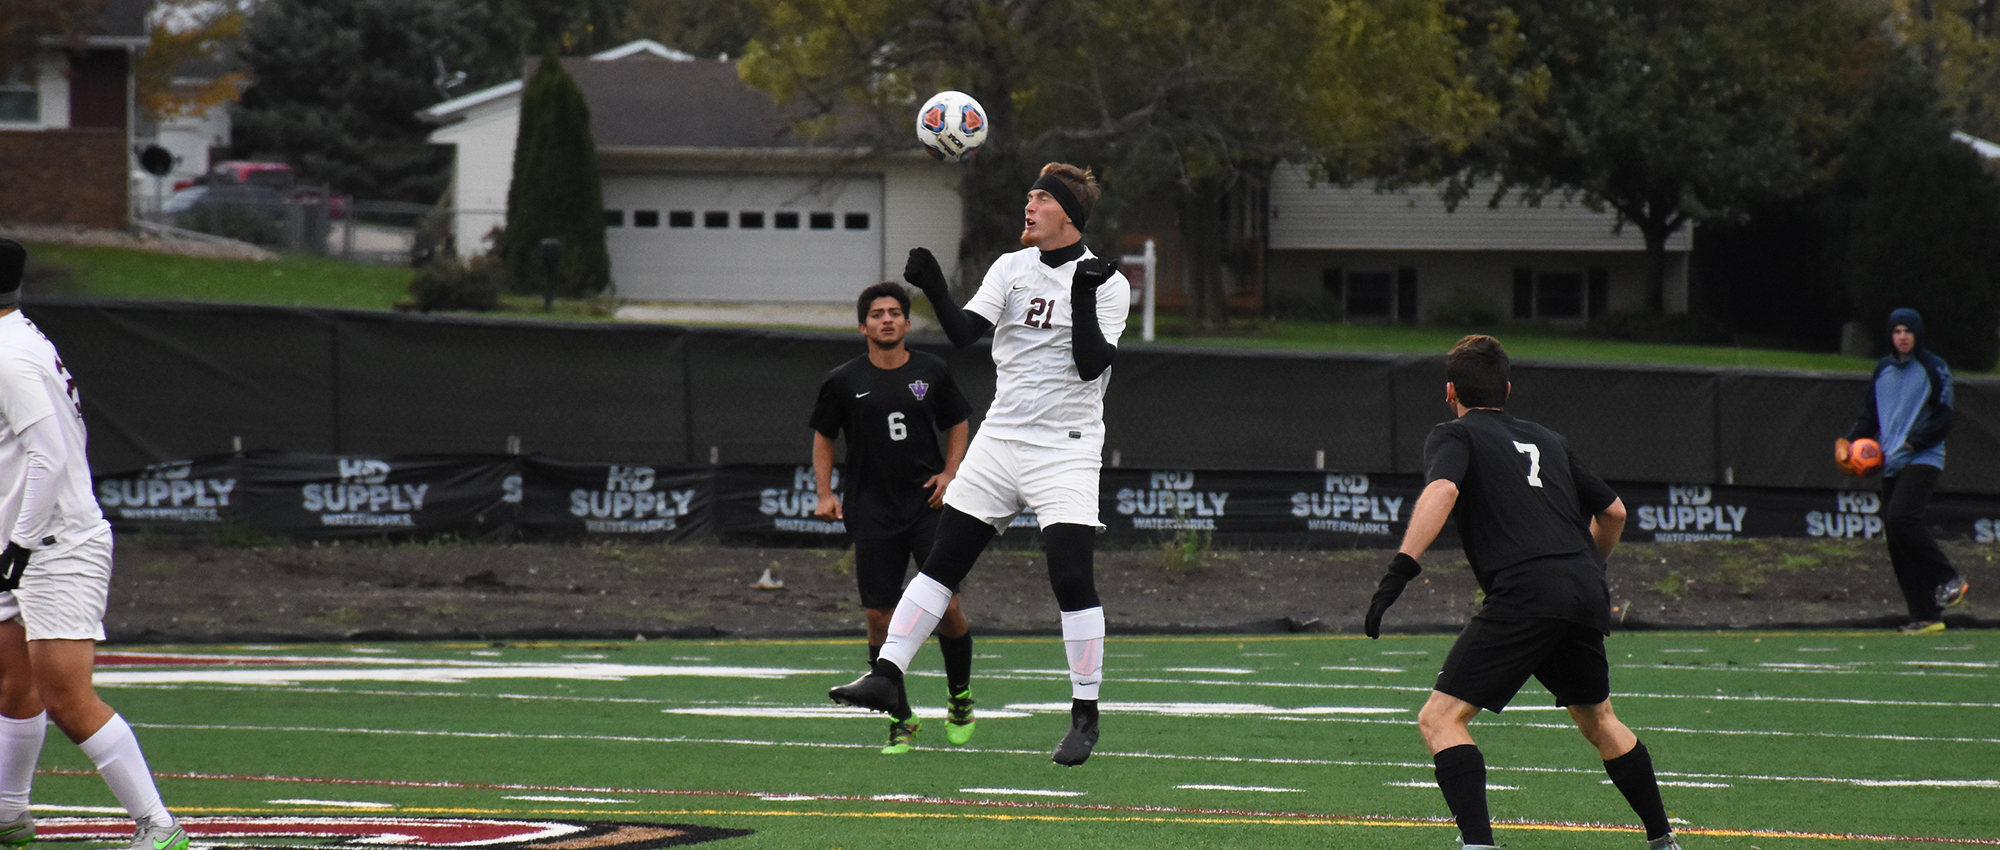 Red Devils Fall to Westminster in Season Finale, 4-1